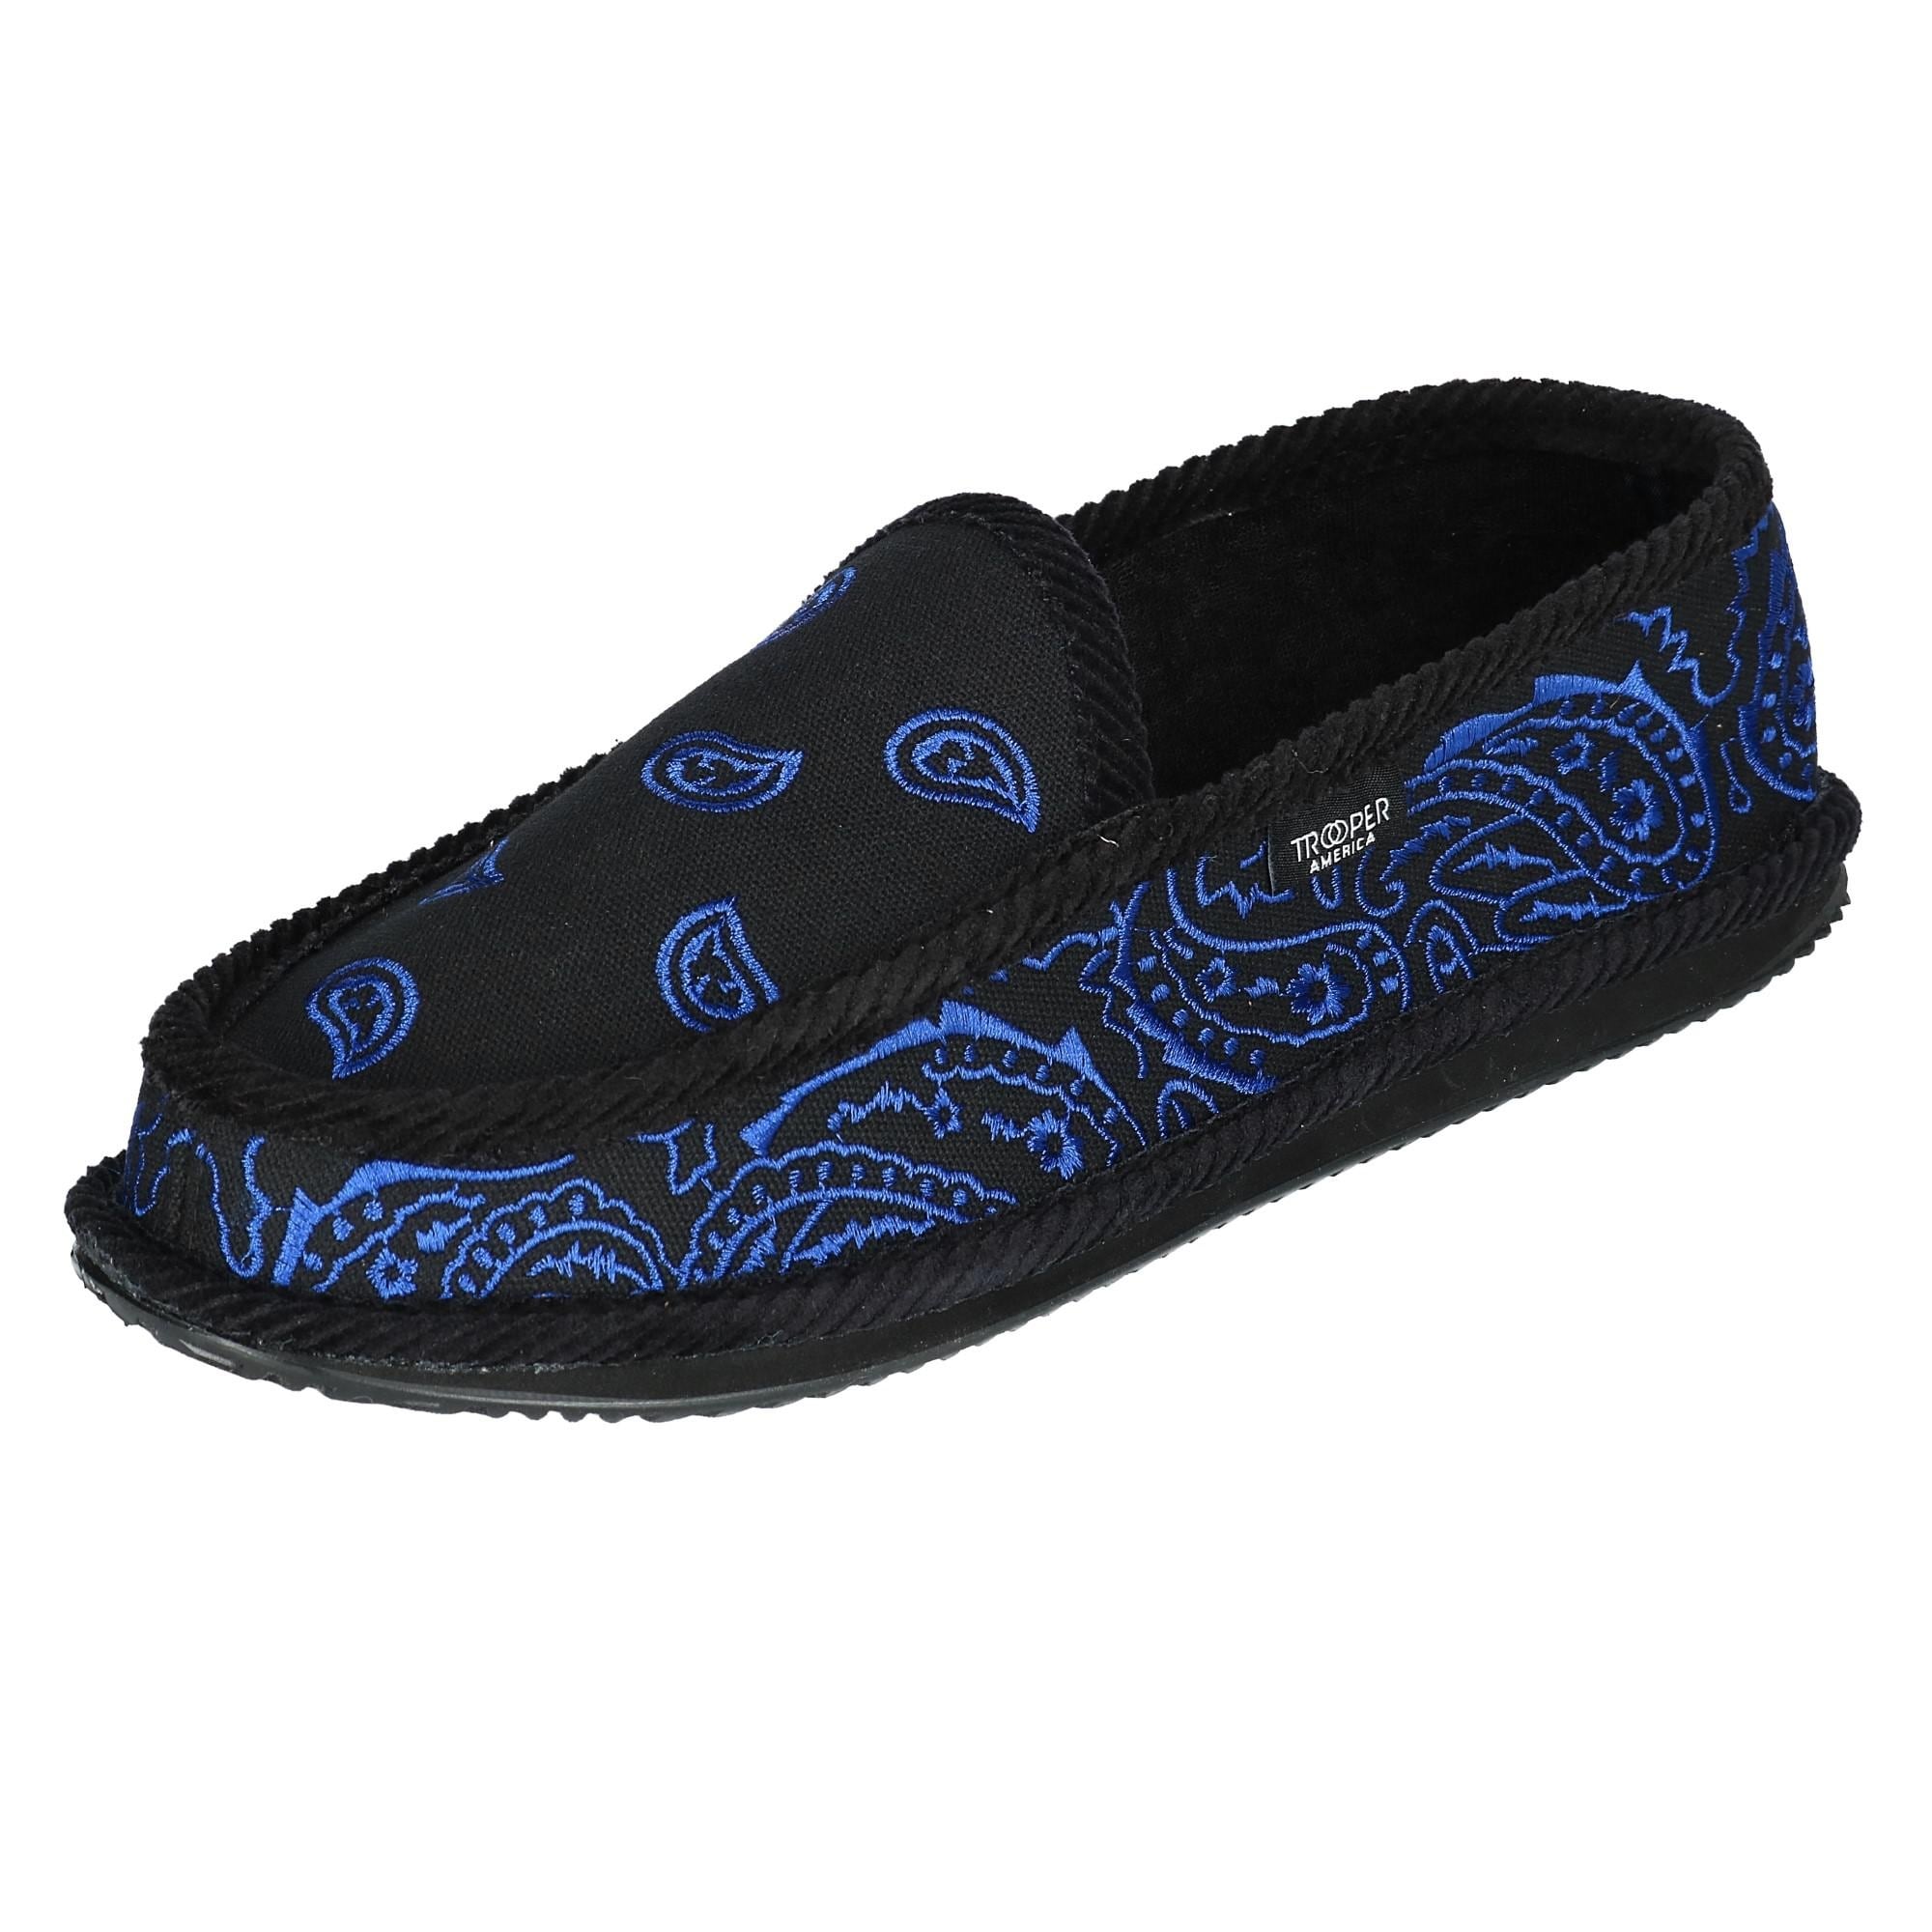 black and blue slippers